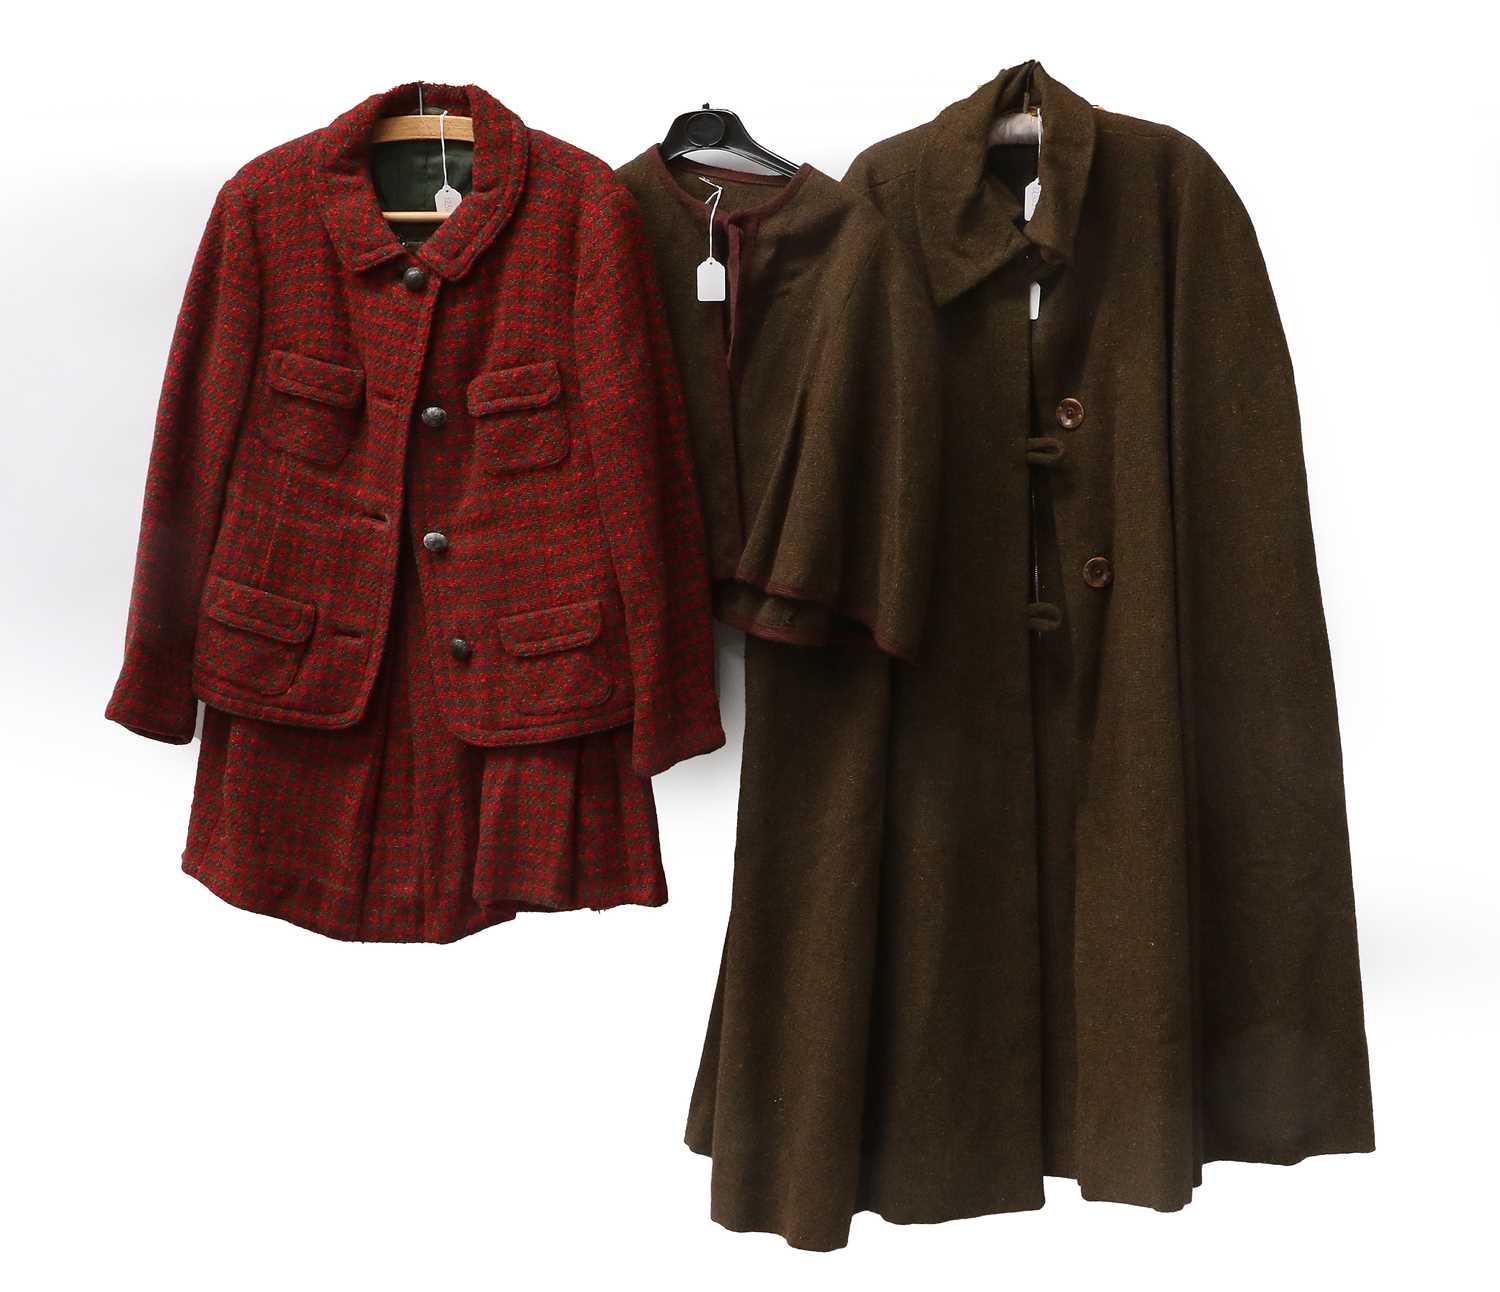 Circa 1950s Wool Coats and Other Items, comprising a loden green wool coat with fox fur trimmed - Image 4 of 4